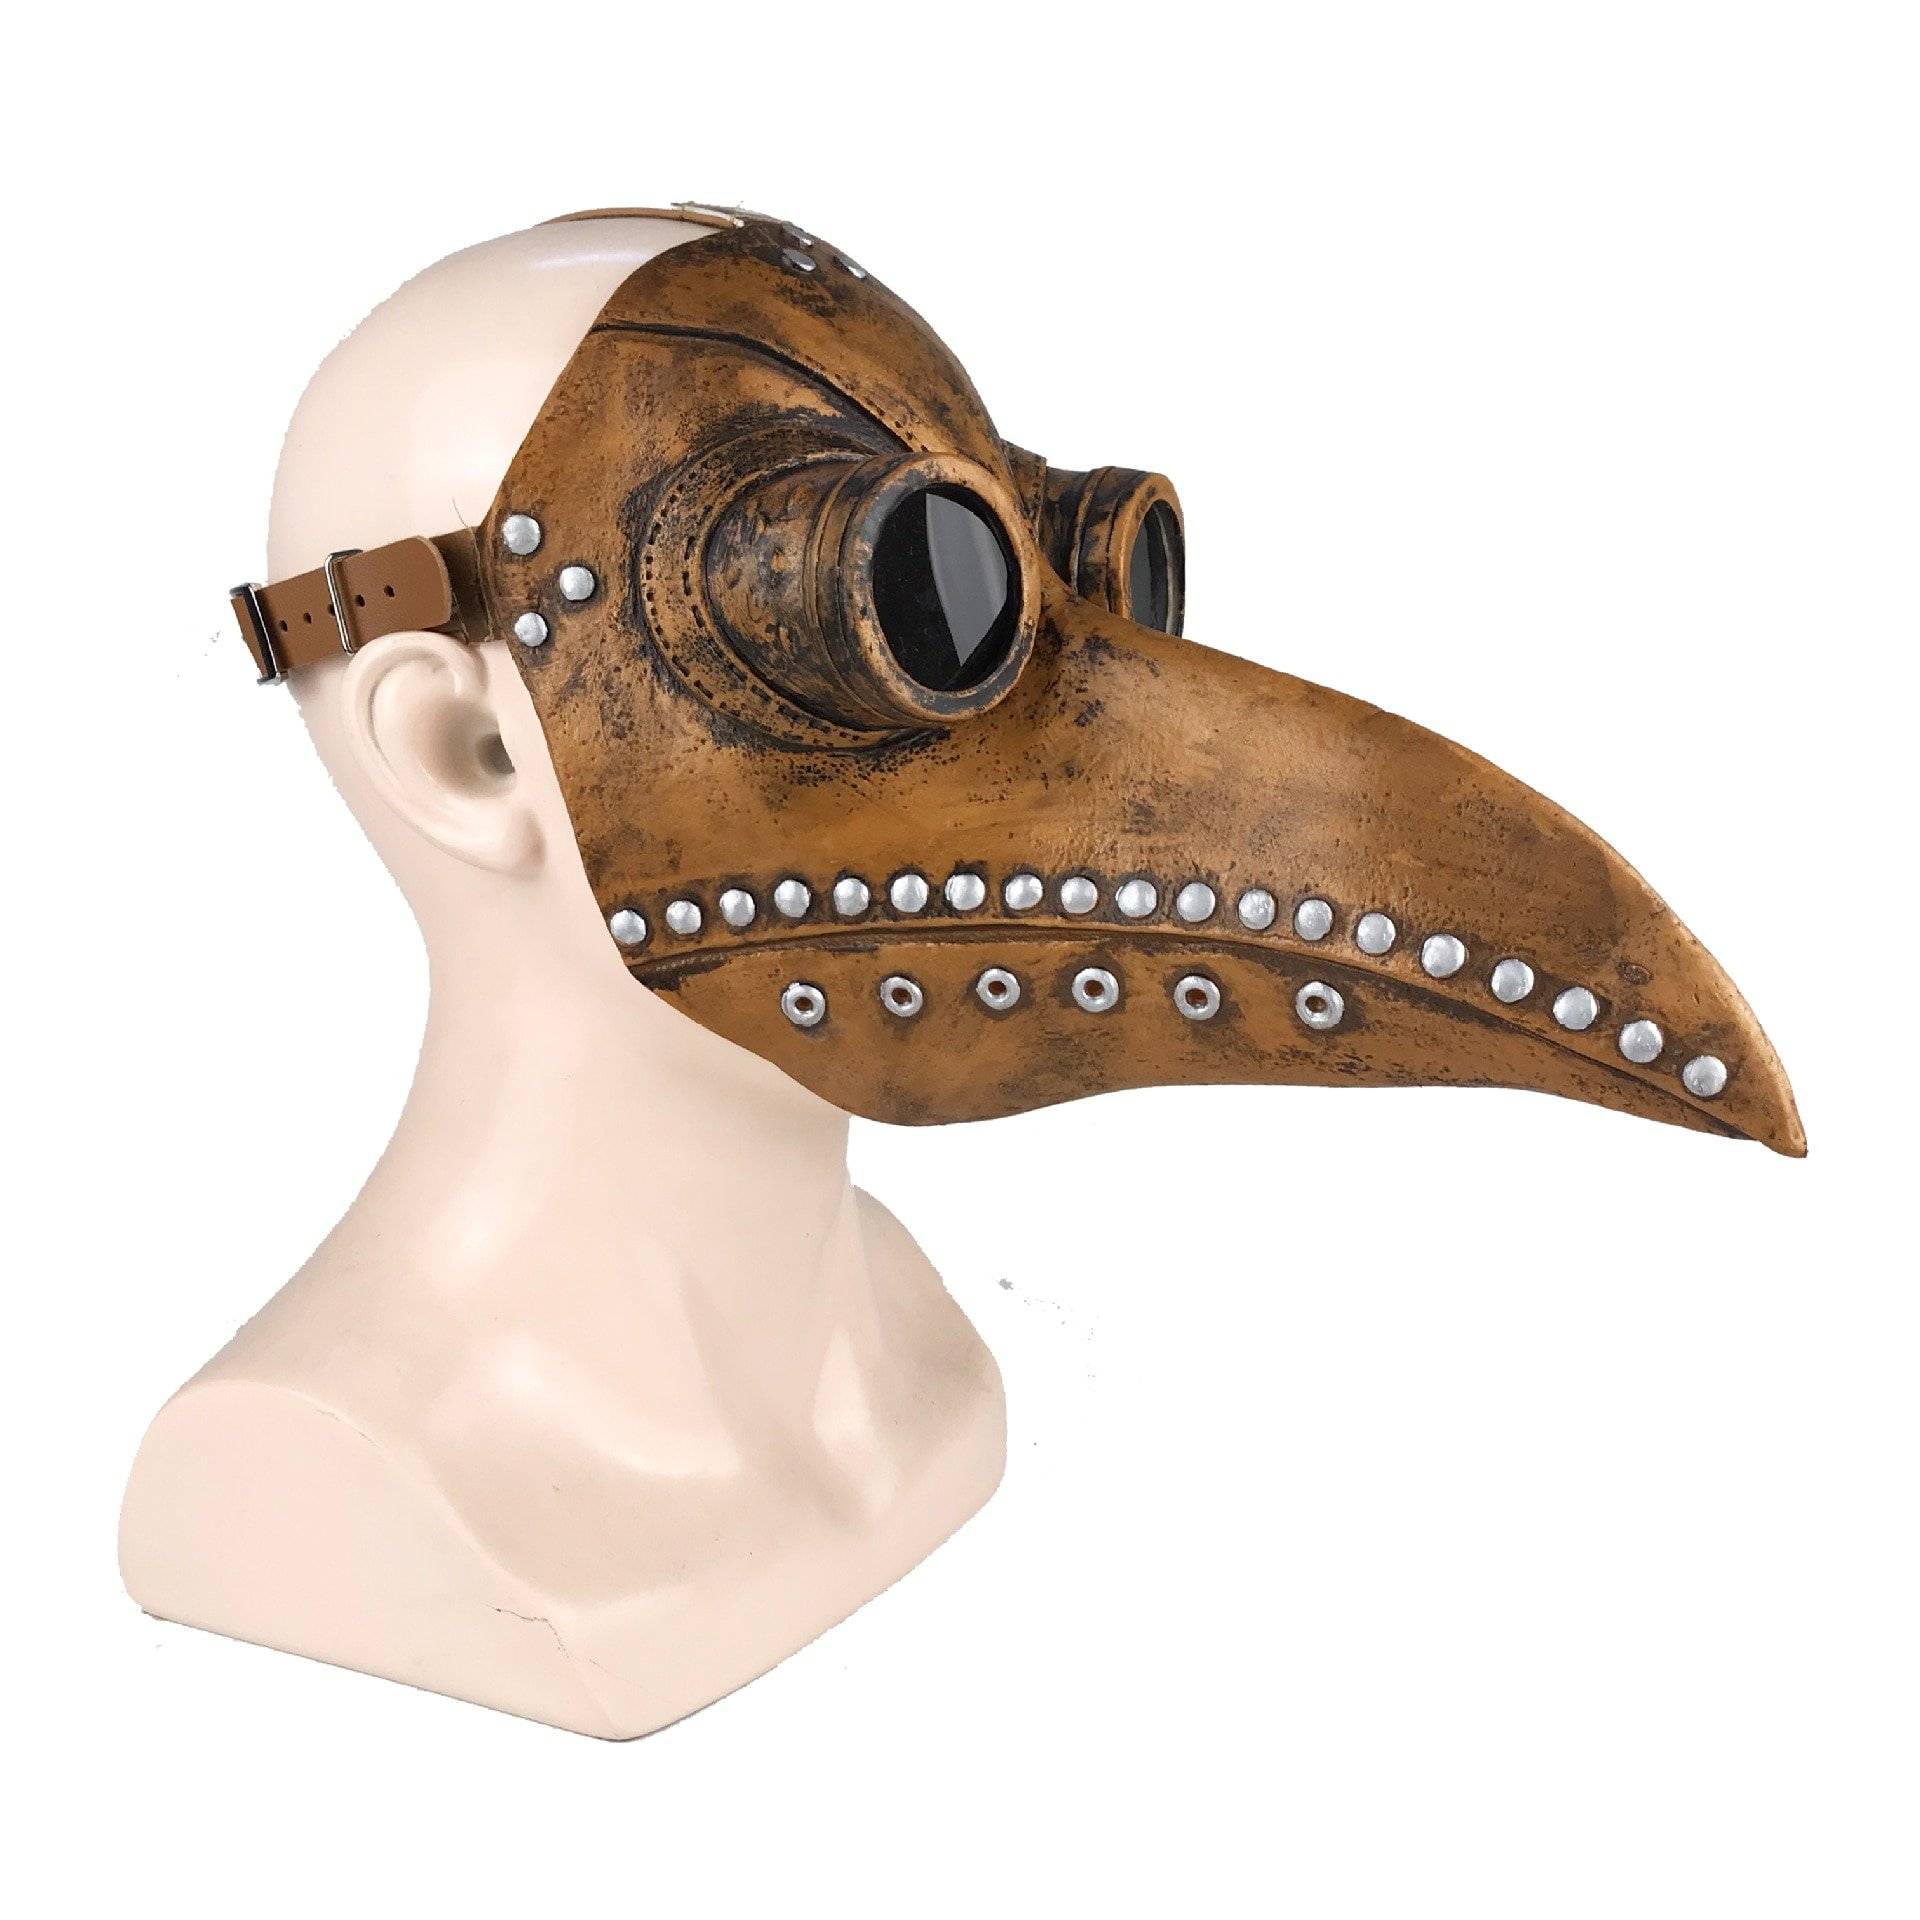 Halloween Plague Doctor Mask Best Sellers Other Products cb5feb1b7314637725a2e7: Black|Bronze|Grey